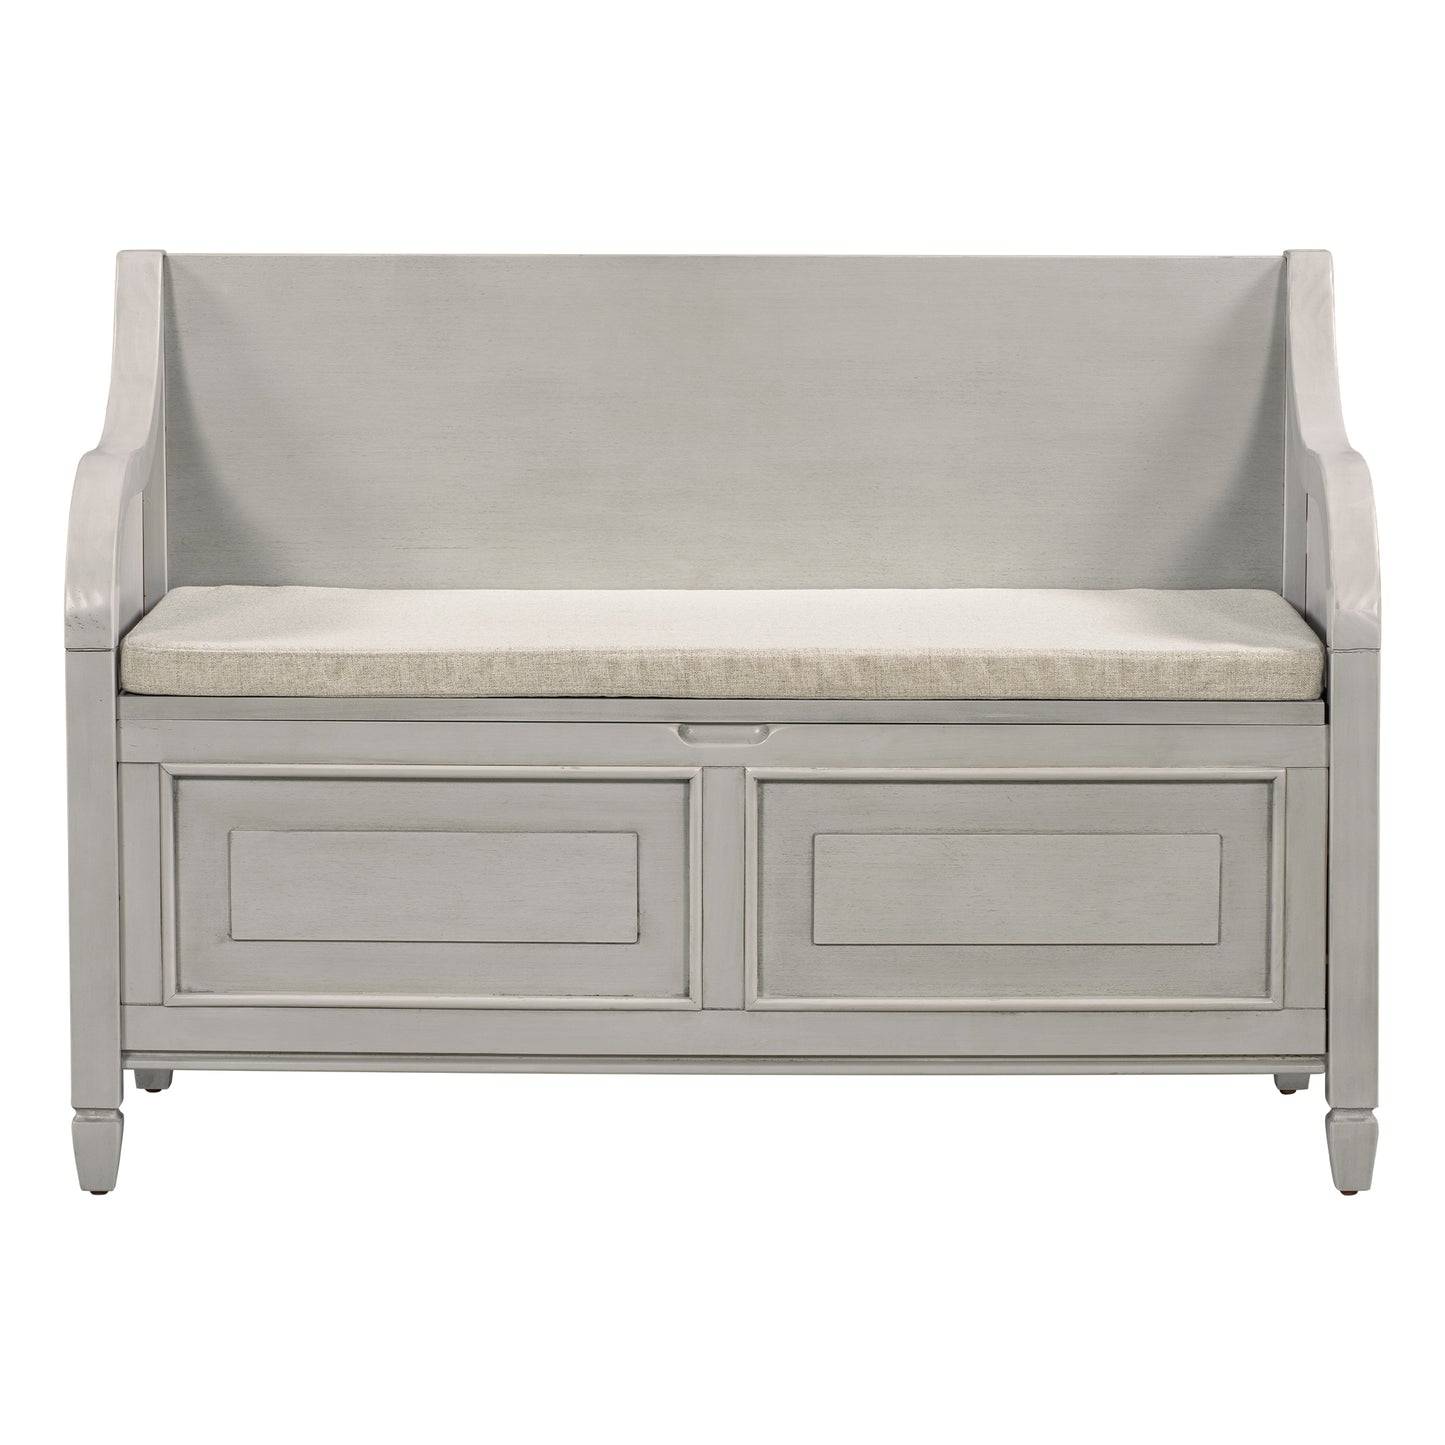 42"Rustic Style Solid wood Entryway Multifunctional Storage Bench with Safety Hinge (Gray Wash + Beige)